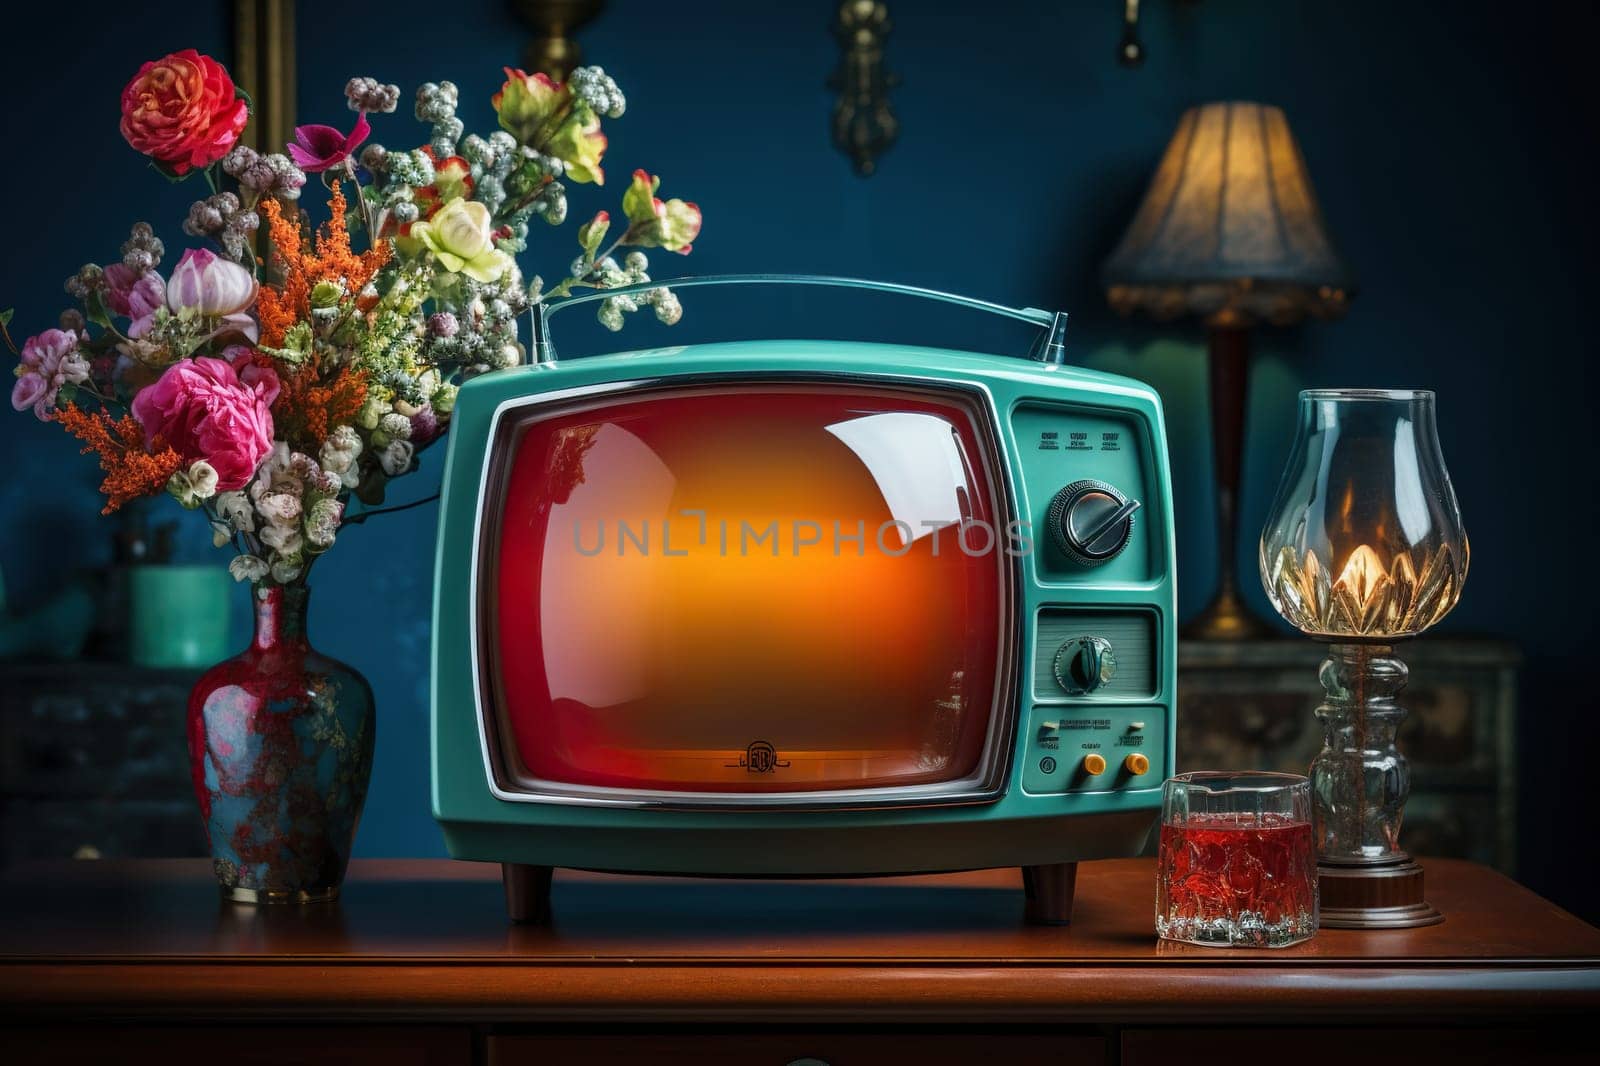 A vintage TV sits on the table next to a bouquet of flowers in a vase. Generated by artificial intelligence by Vovmar